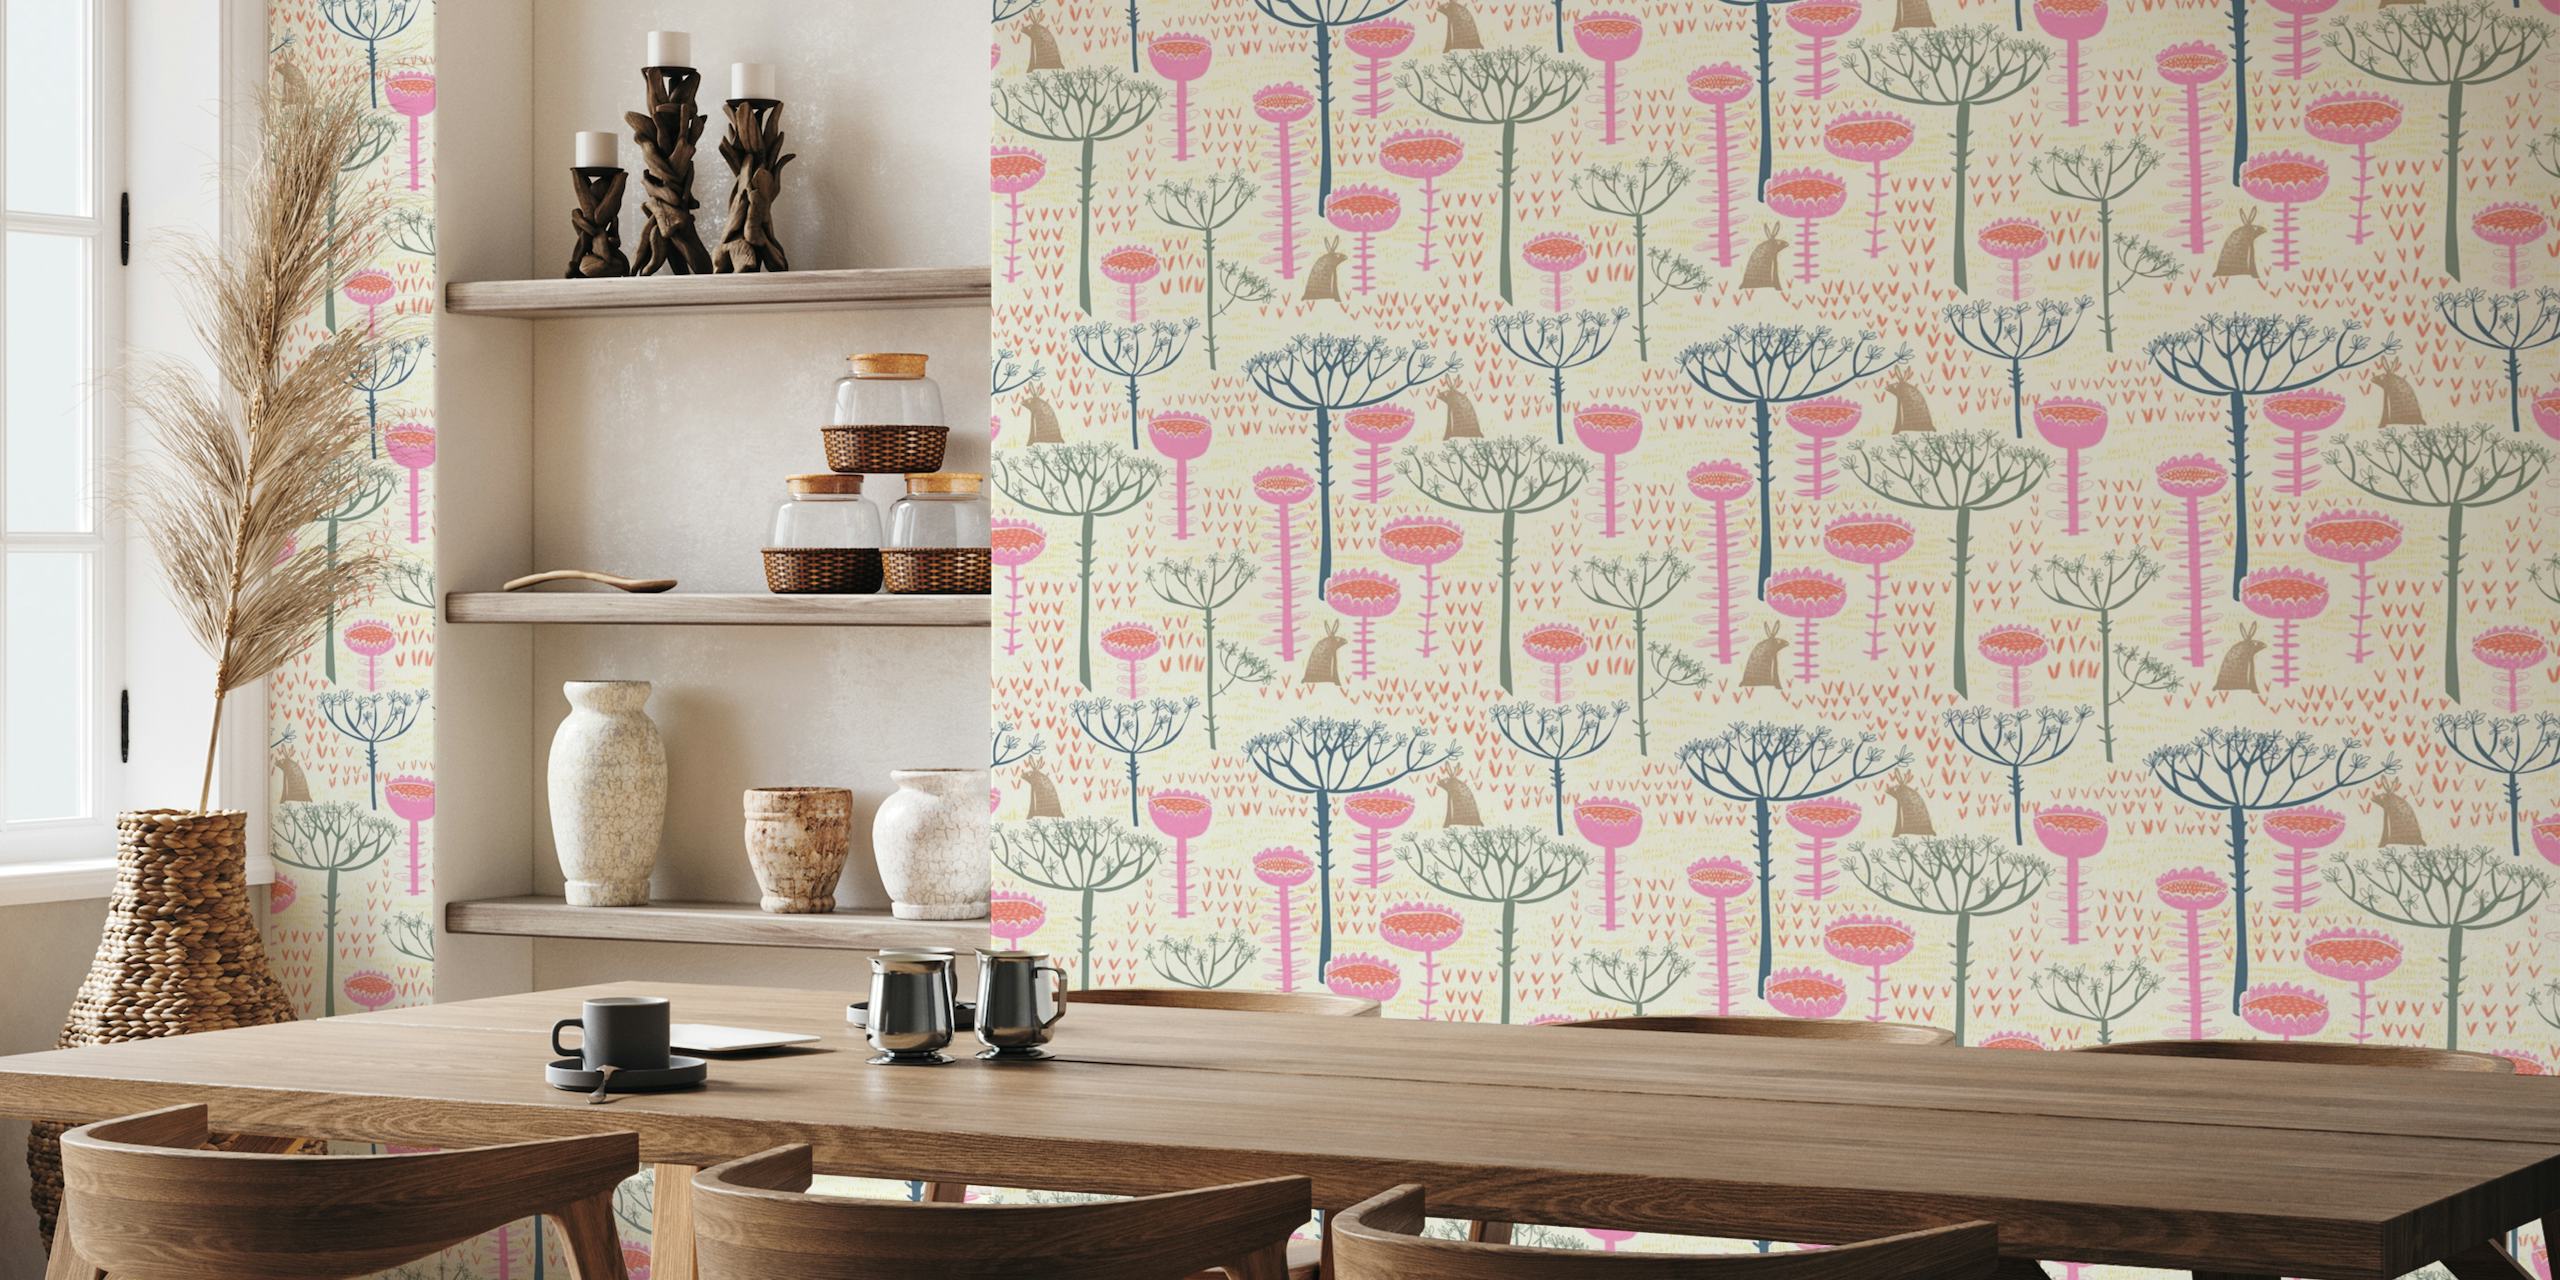 Block Print Scandinavian Meadow wall mural with stylized floral design in earthy tones.